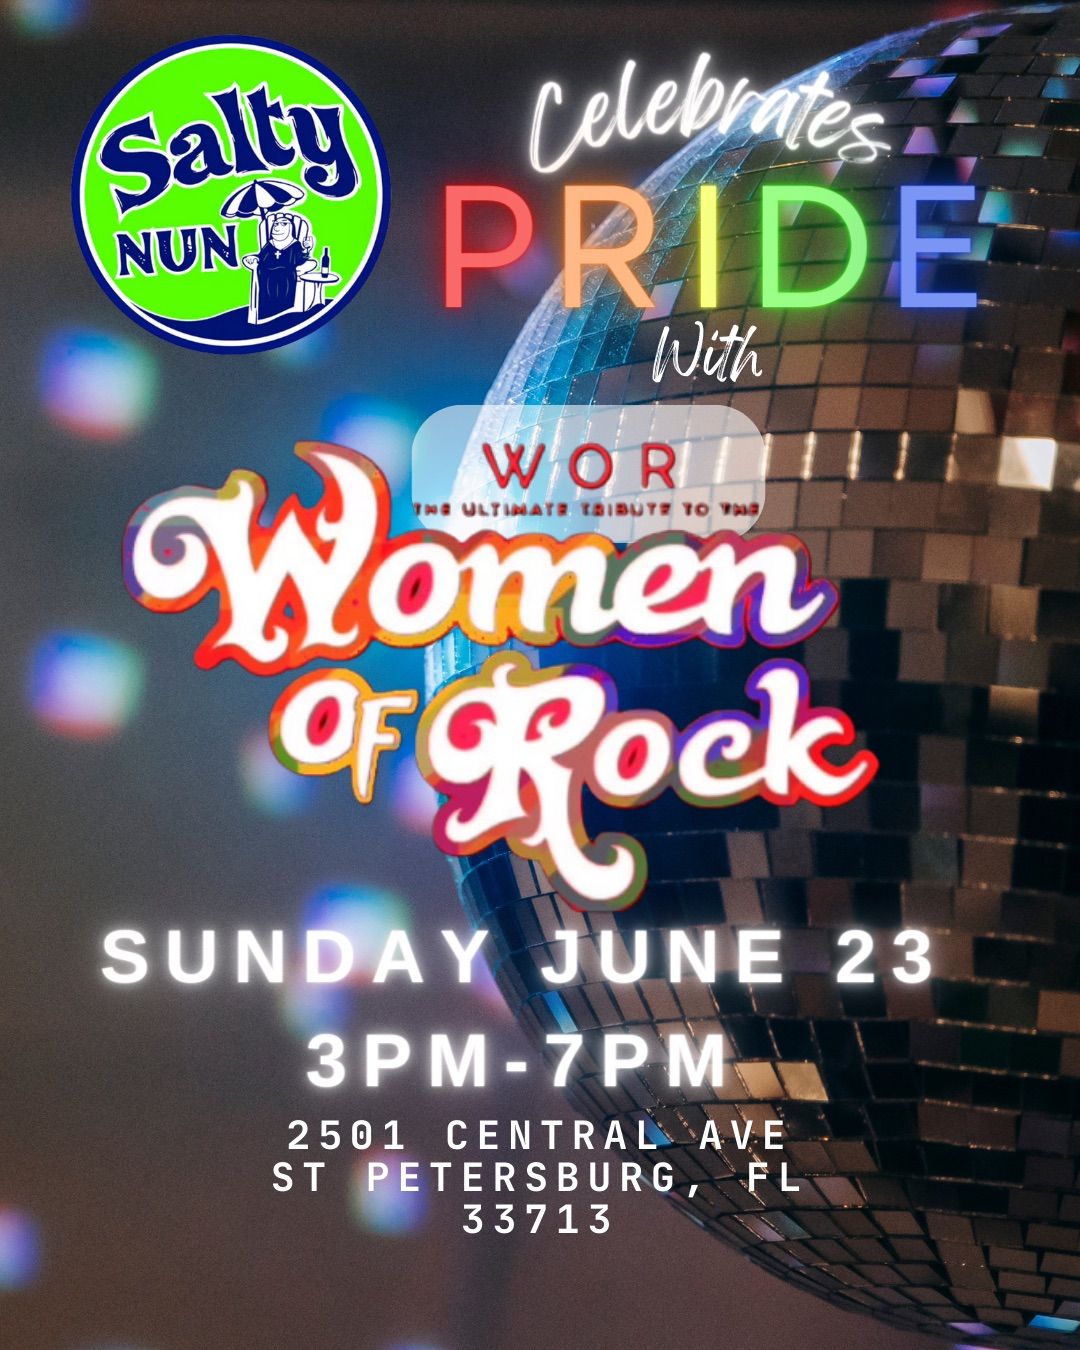 Celebrate PRIDE with WOR @ Salty Nun